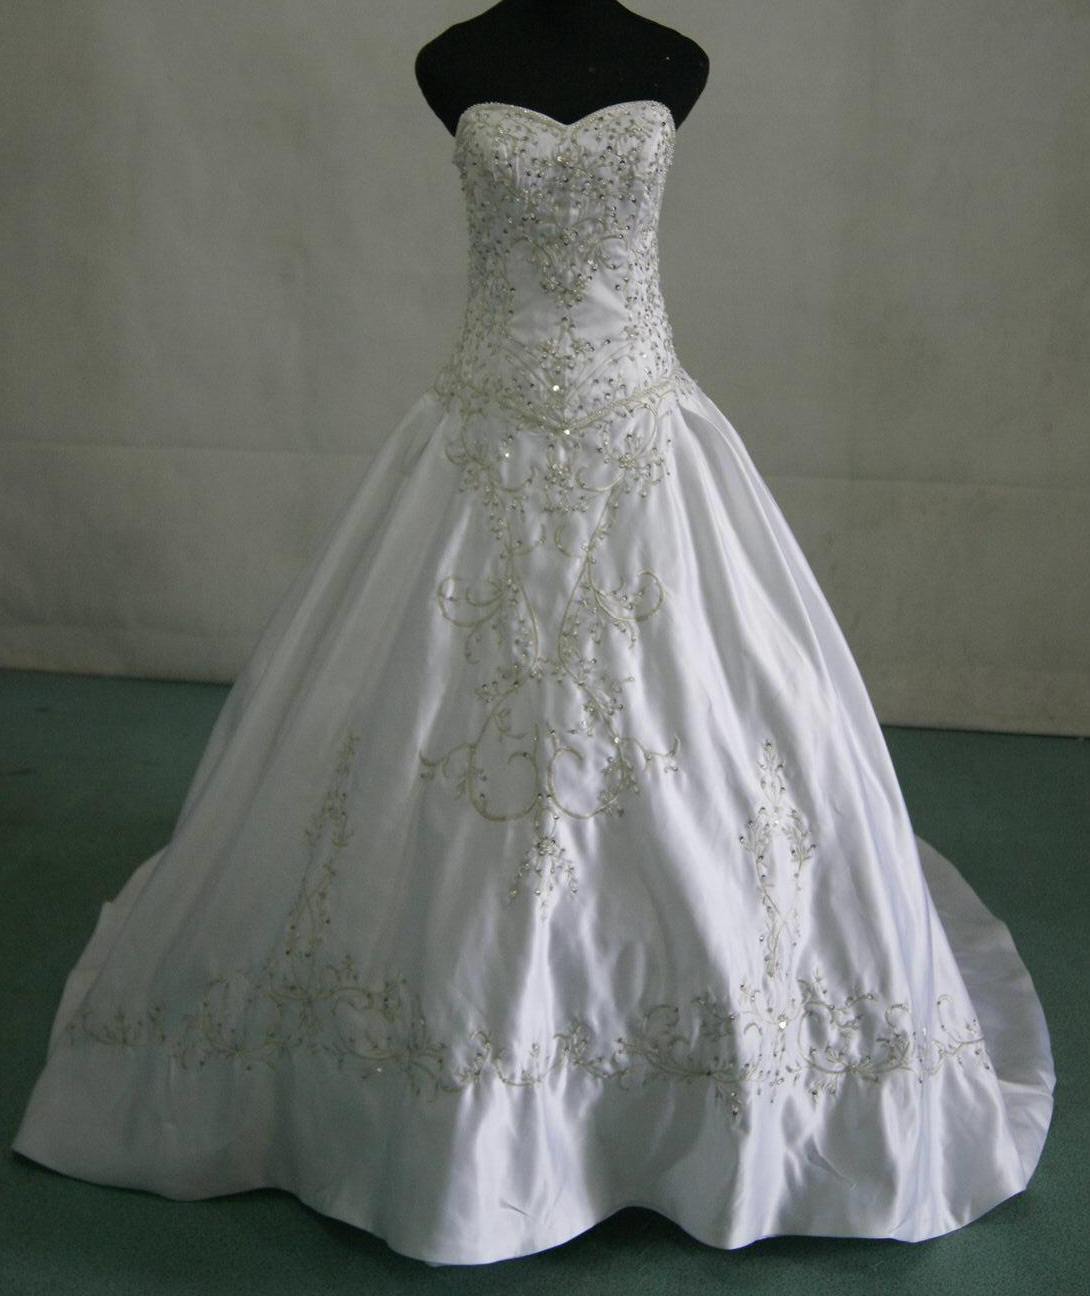 strapless embroidered wedding gown